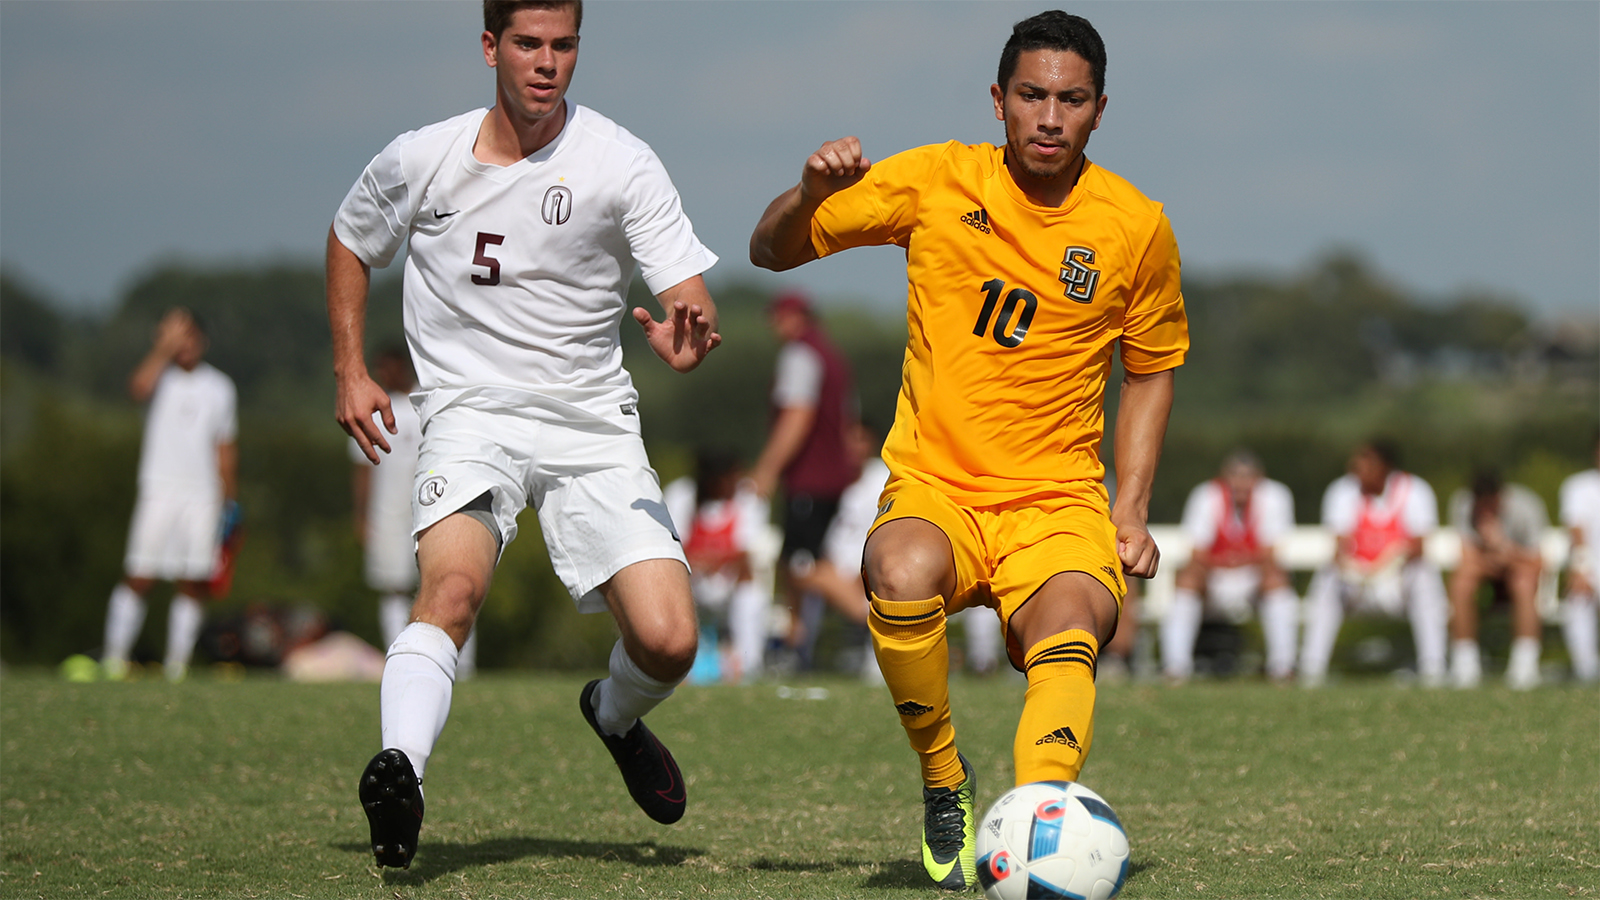 Lopez Punches Pirates Ticket to SCAC Tourney with Last Second Goal